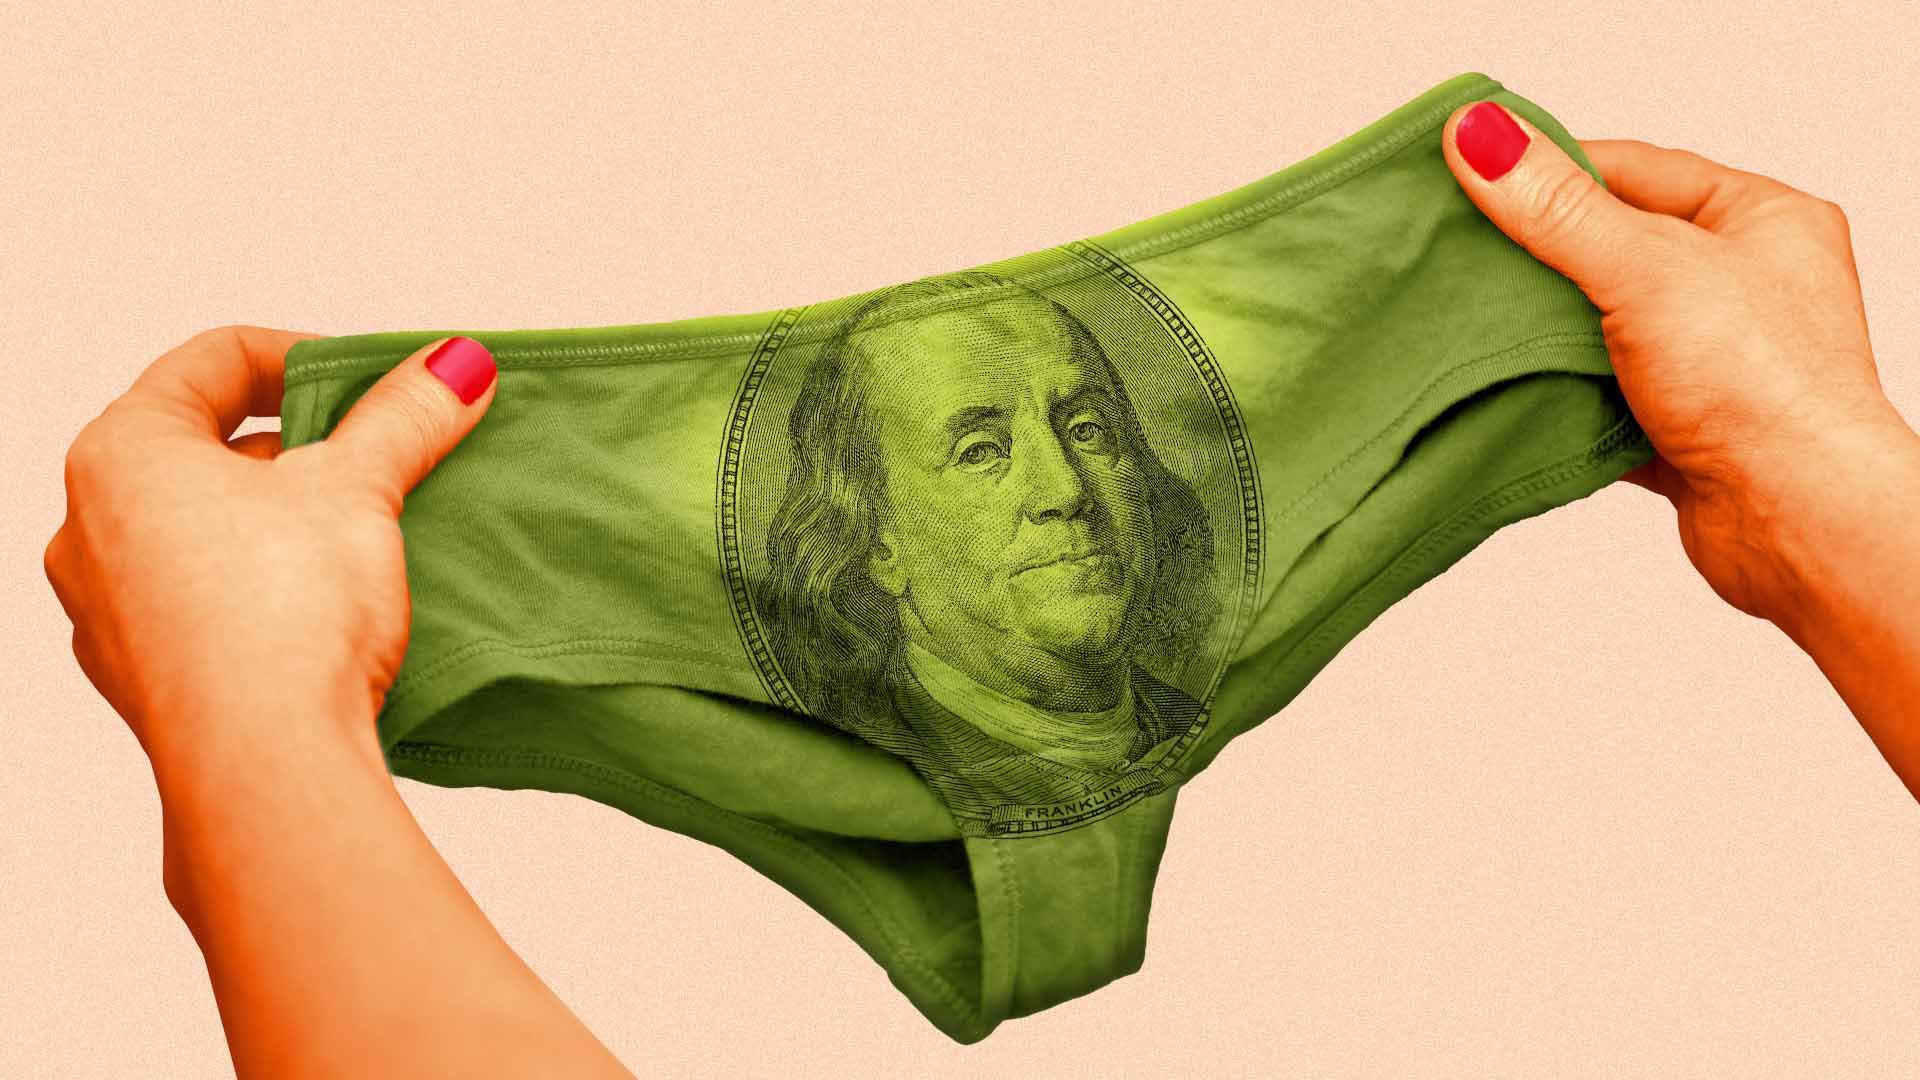 Women's underwear is taxed at higher rates than men's